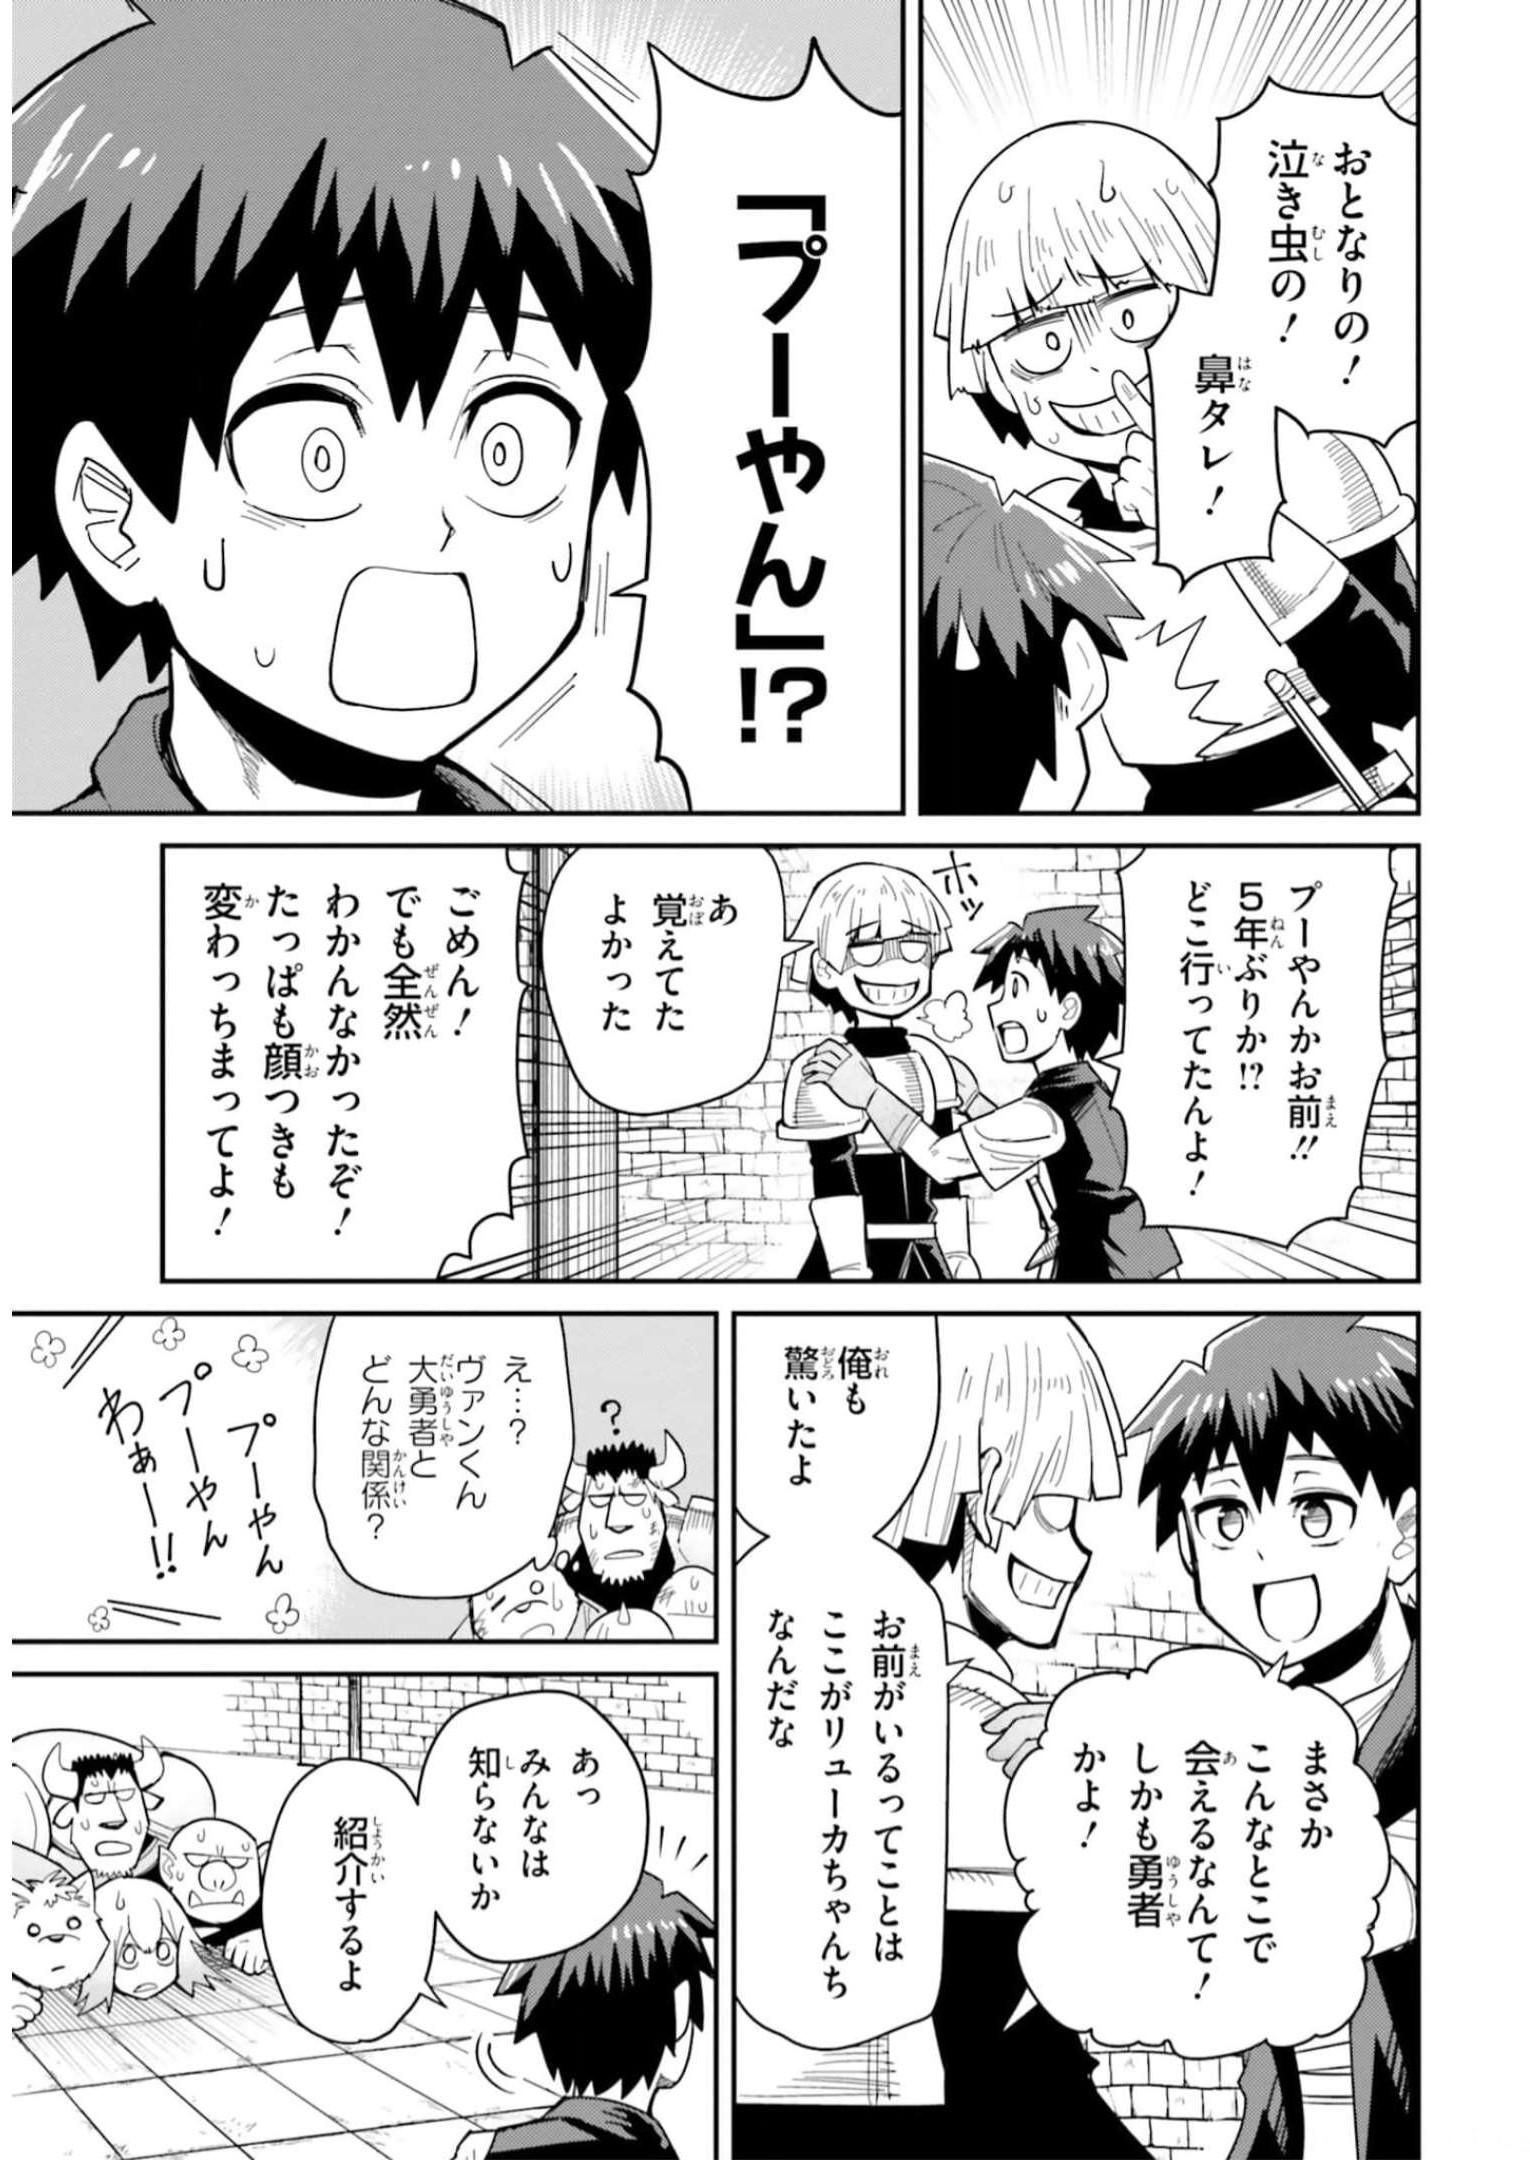 Dungeon Friends Forever Dungeon’s Childhood Friend ダンジョンの幼なじみ 第27話 - Page 16